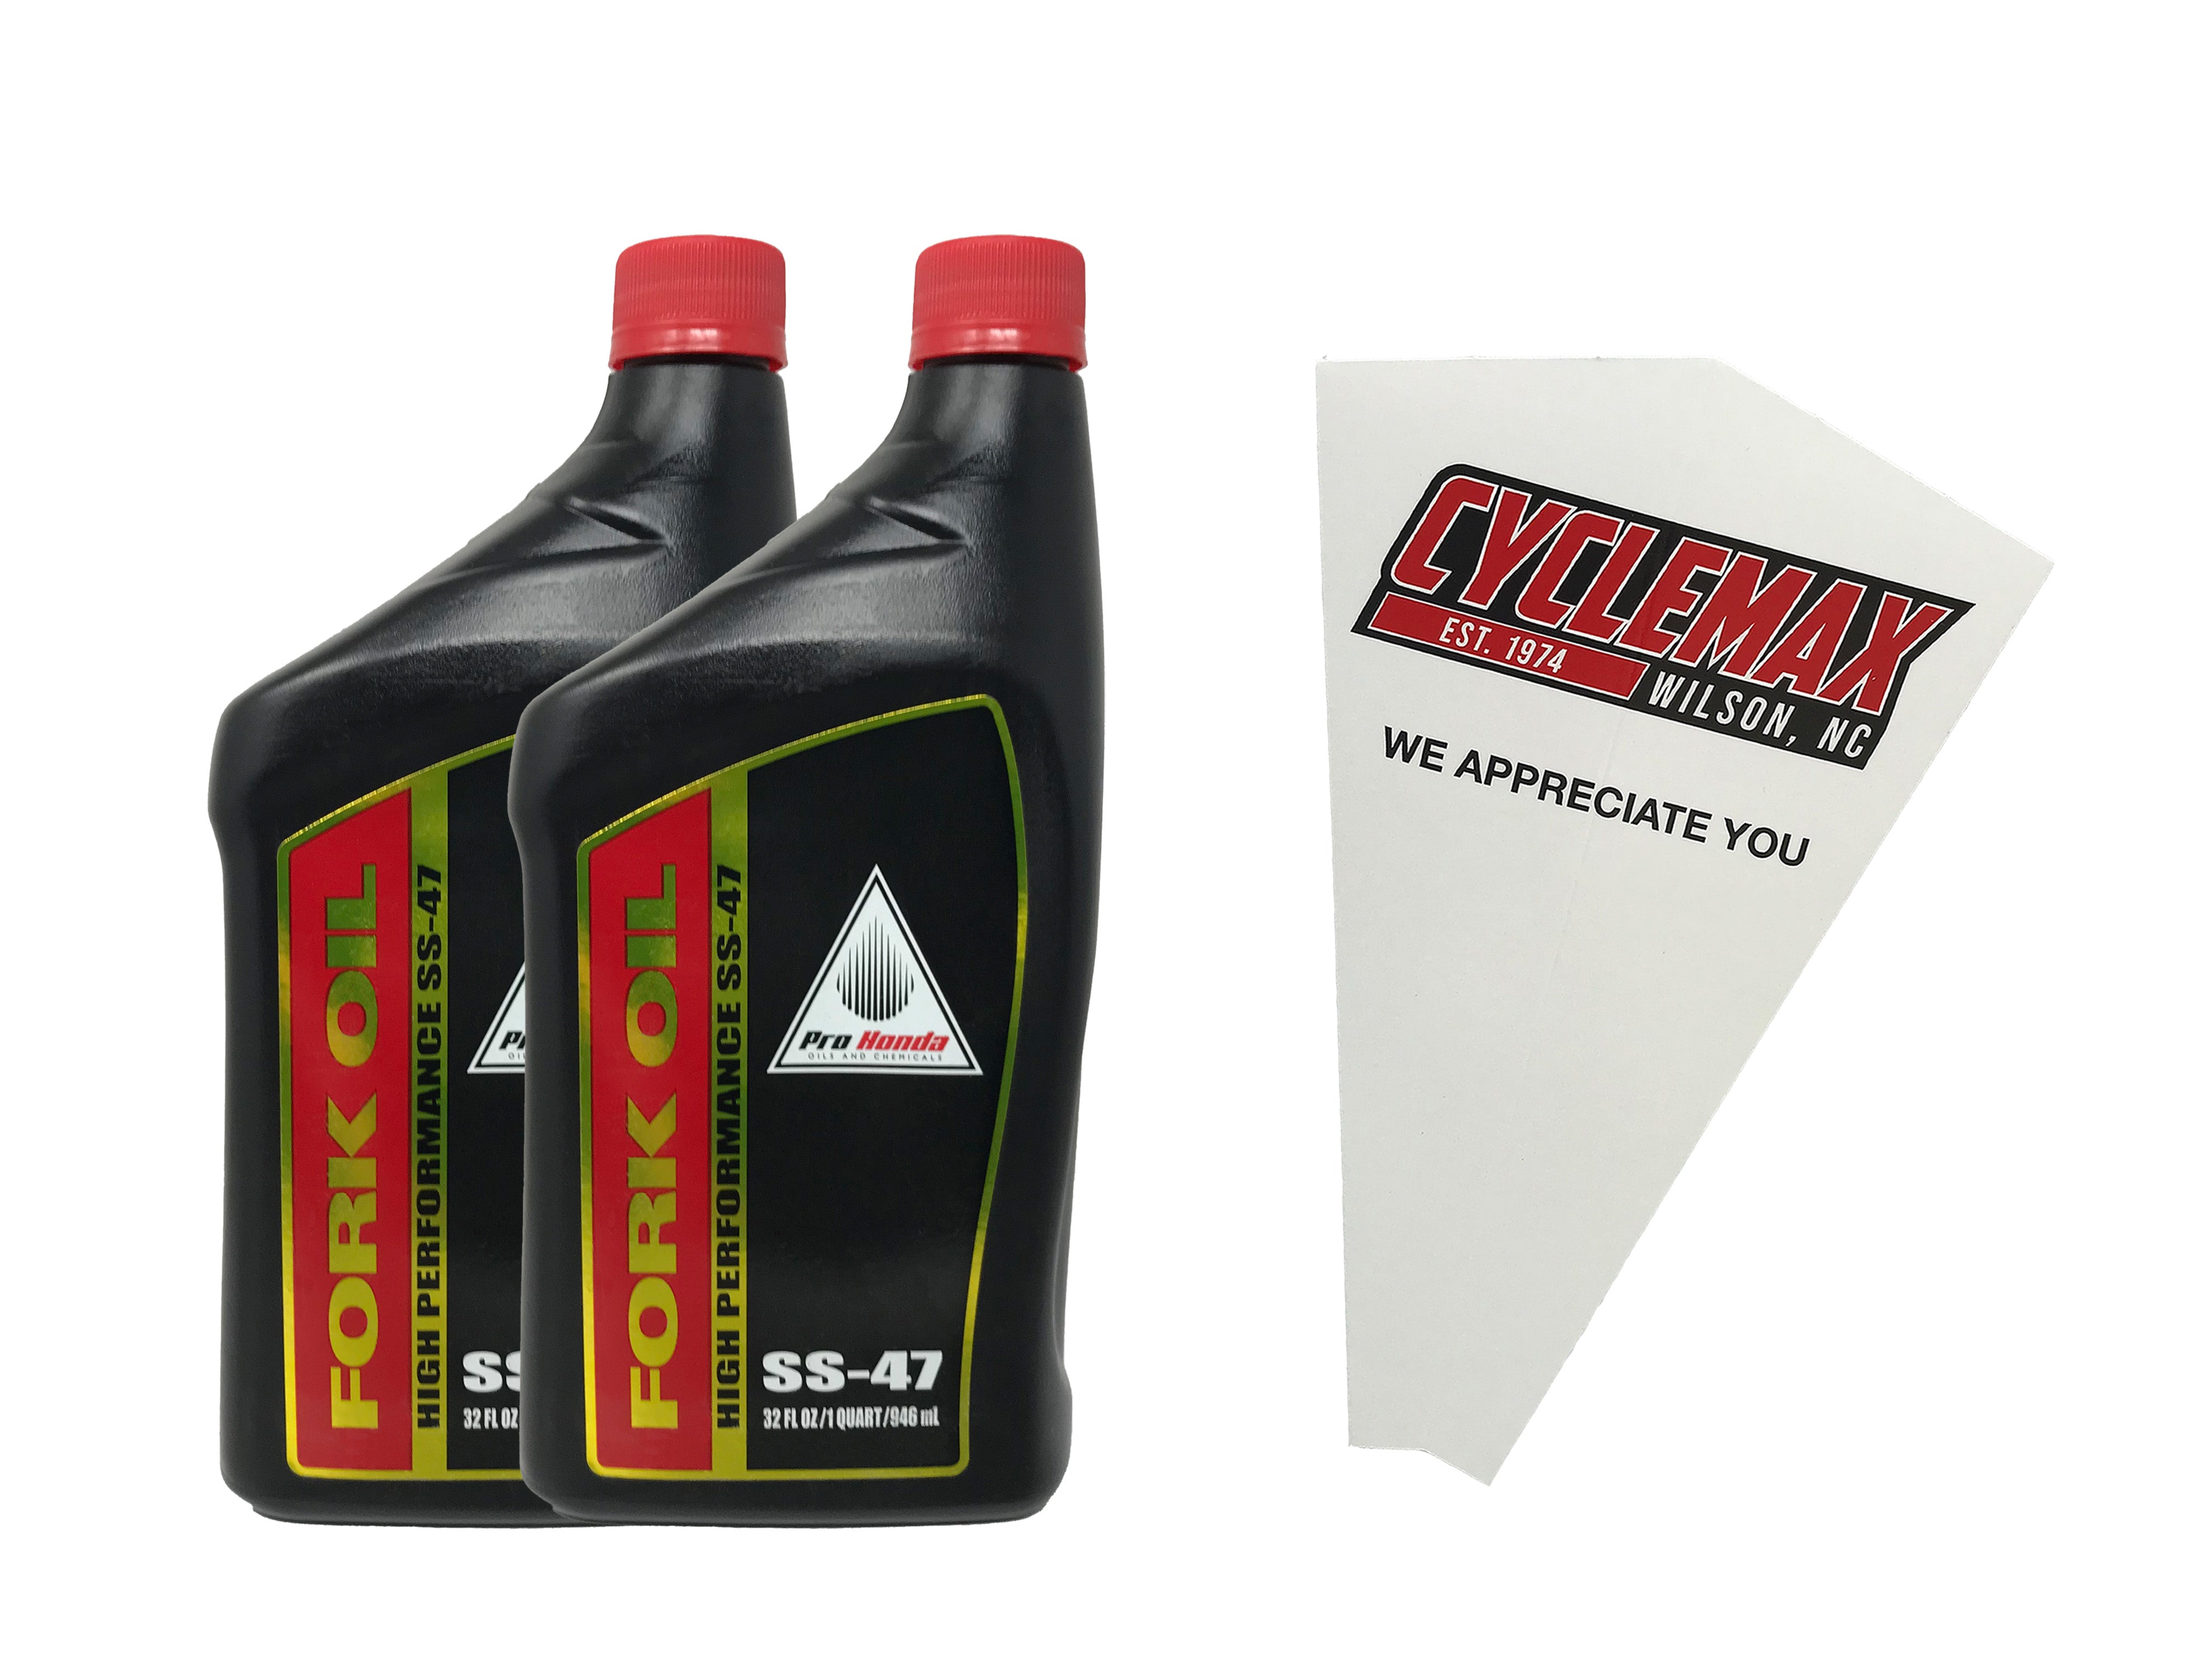 Cyclemax Two Pack for Honda HP Fork Oil 08208-0013 Contains Two Quarts and a Funnel